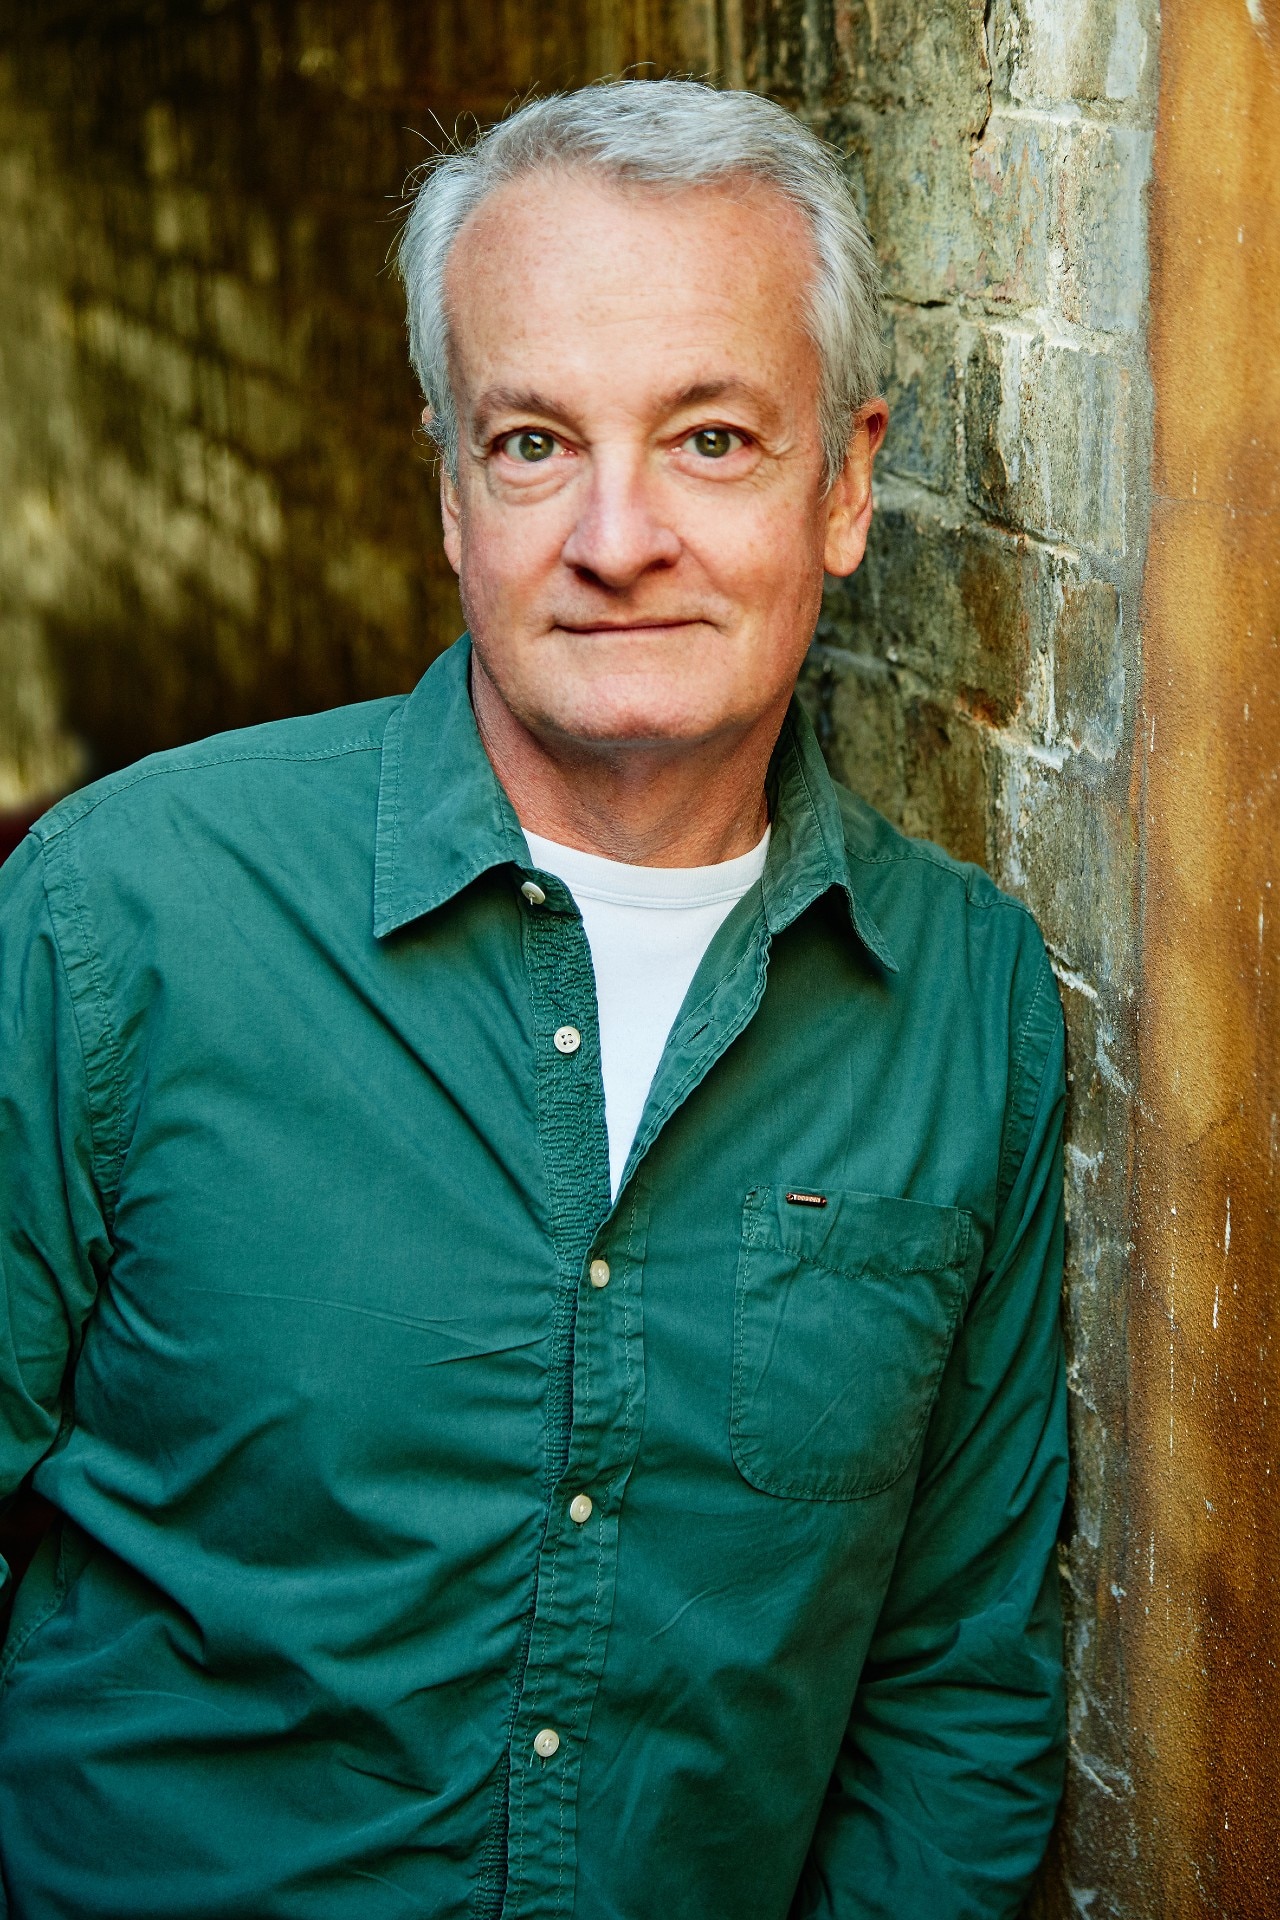 A 60-something man looks into the camera. He's leaning against a brick wall, while wearing a dark green button-up shirt 